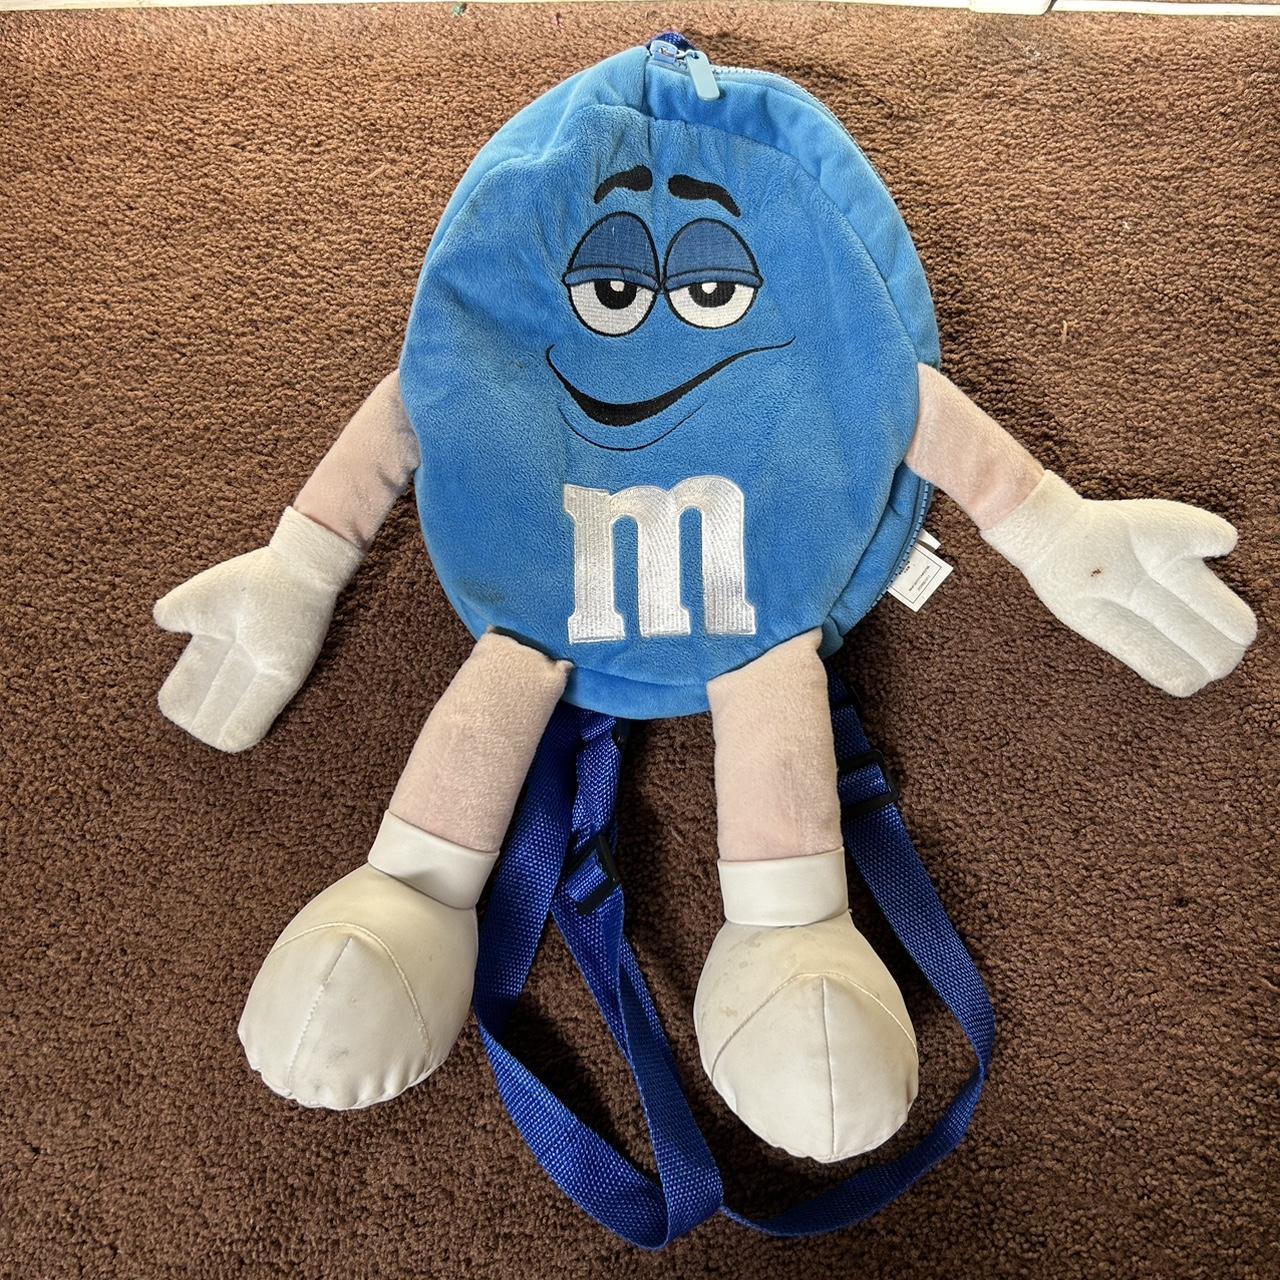 CUTE BLUE m&m BACKPACK ! FITS QUITE A BIT AND SO - Depop